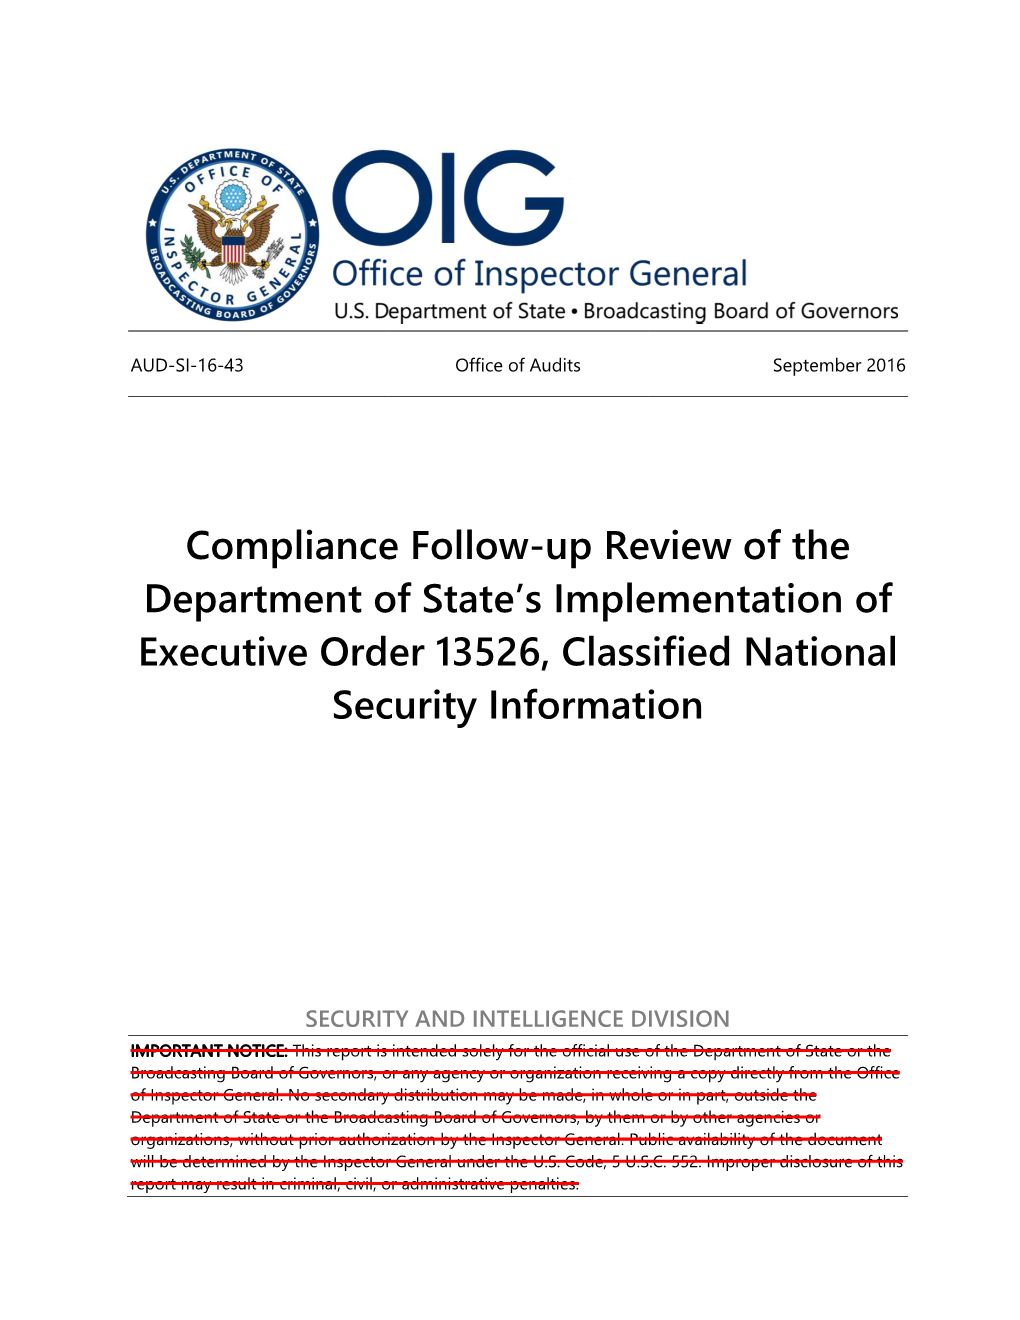 Compliance Follow-Up Review of the Department of State's